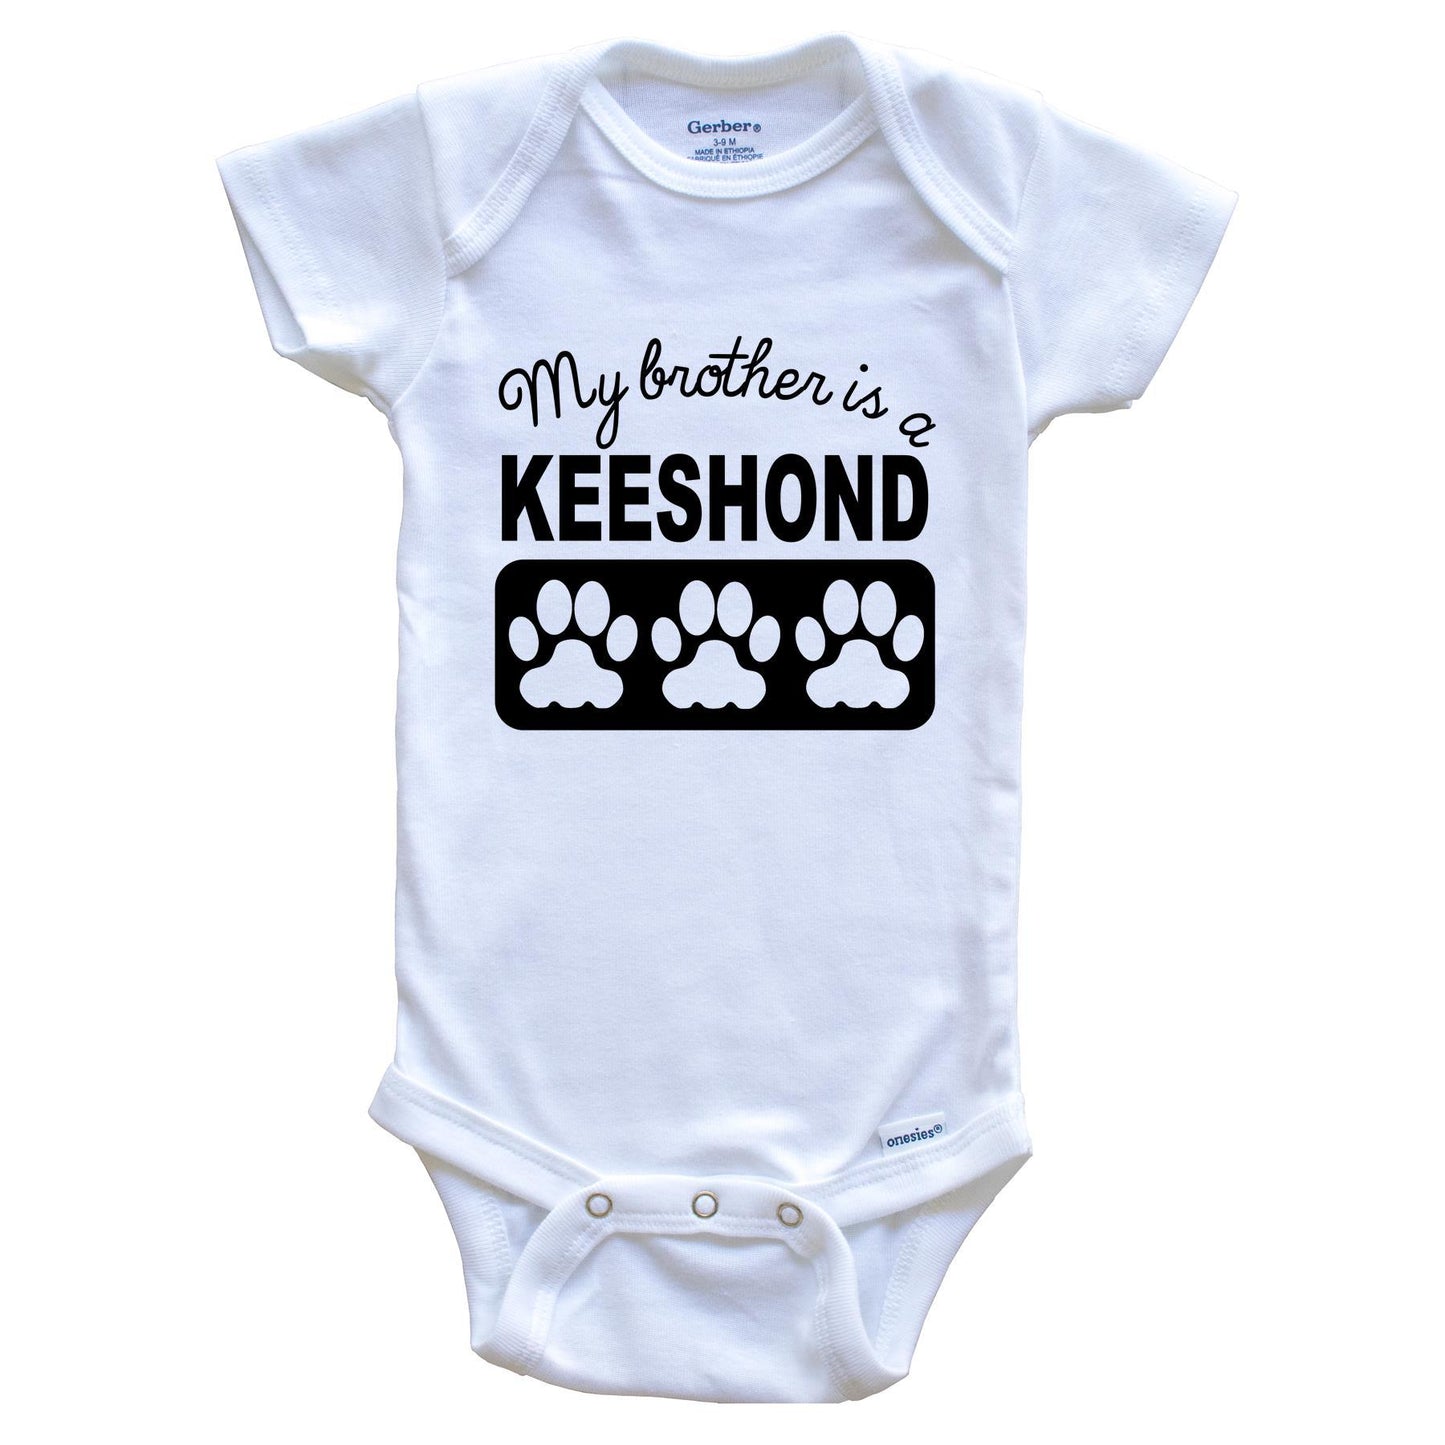 My Brother Is A Keeshond Baby Onesie